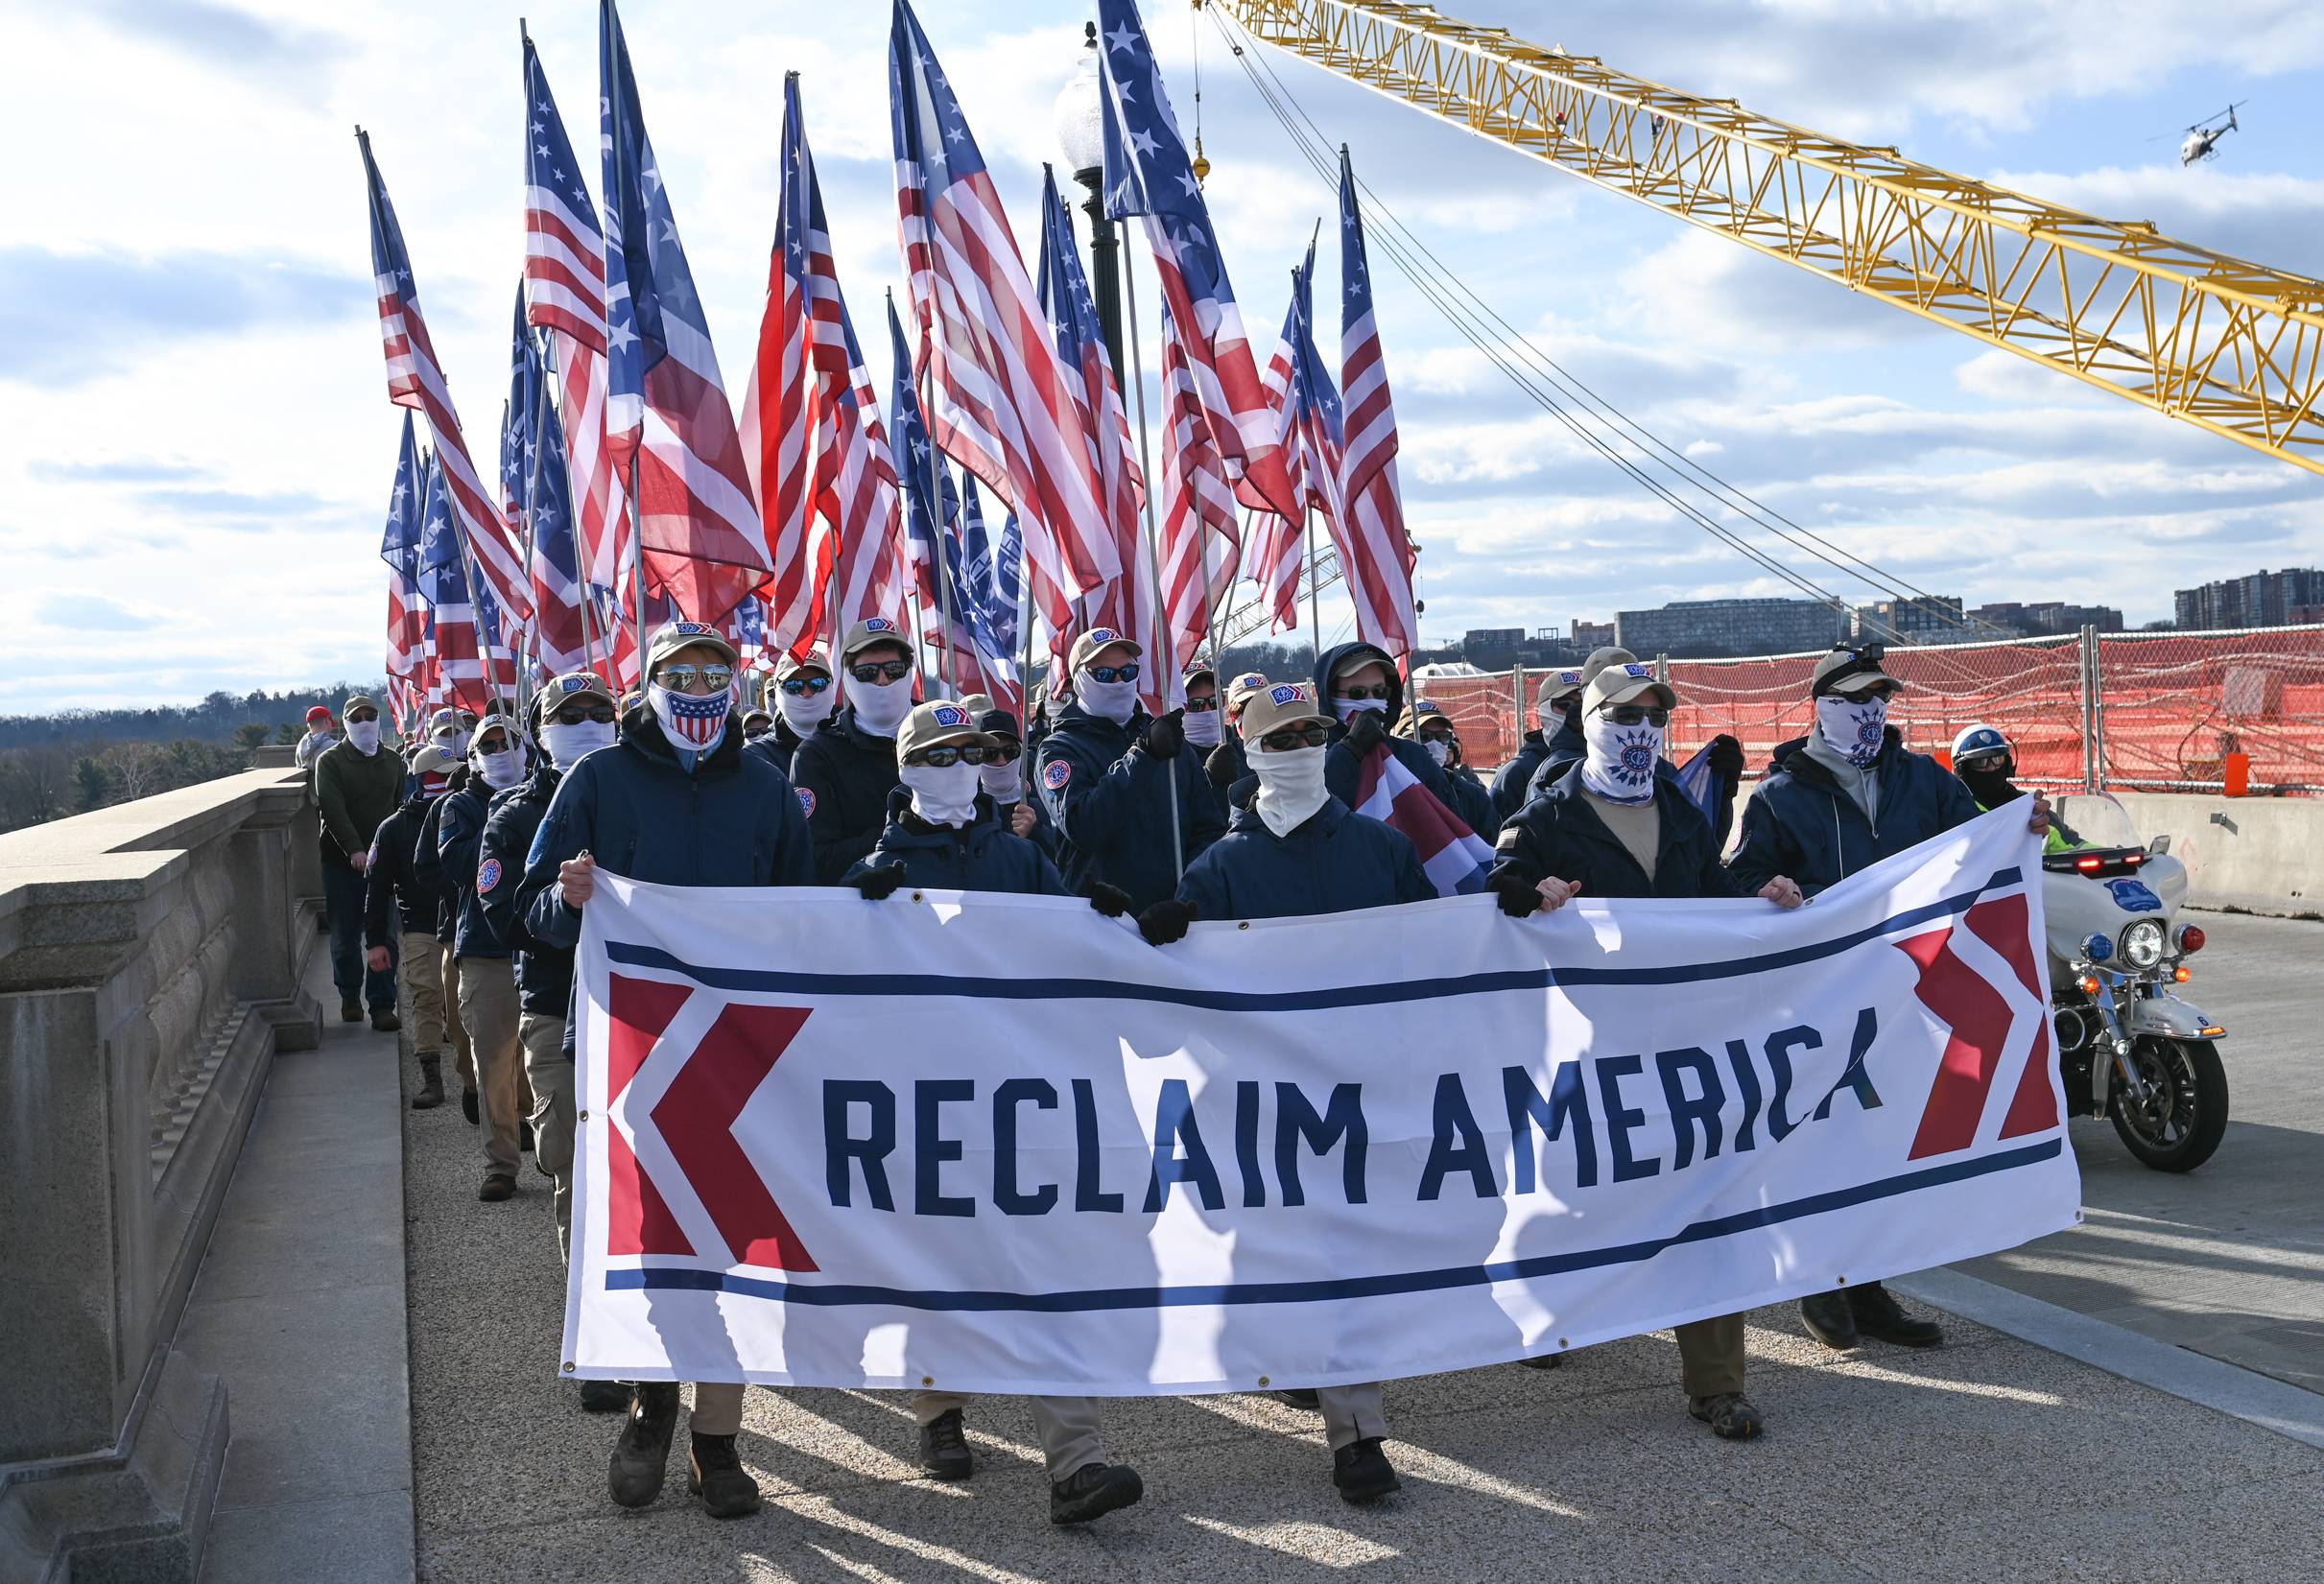 American Fascist Group Patriot Front Marches in Washington D.C. from the Lincoln Memorial to the US Capitol building for a private rally, escorted by DC Metro Police on February 8, 2020. (Photo by Zach D Roberts/NurPhoto via Getty Images)